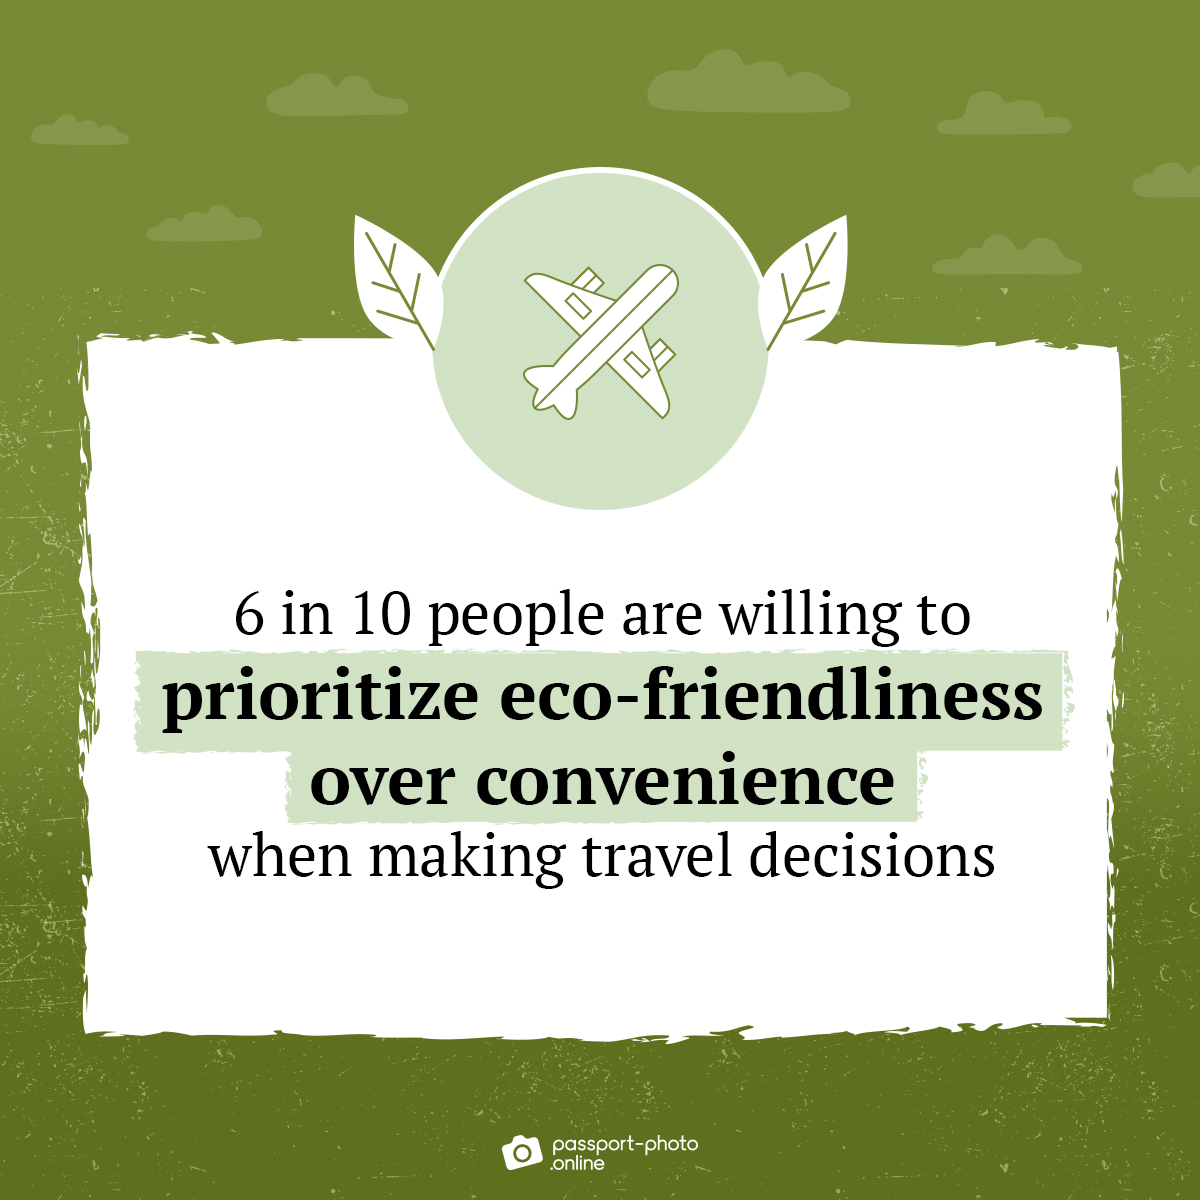 60% of travelers prioritize eco-friendliness over convenience